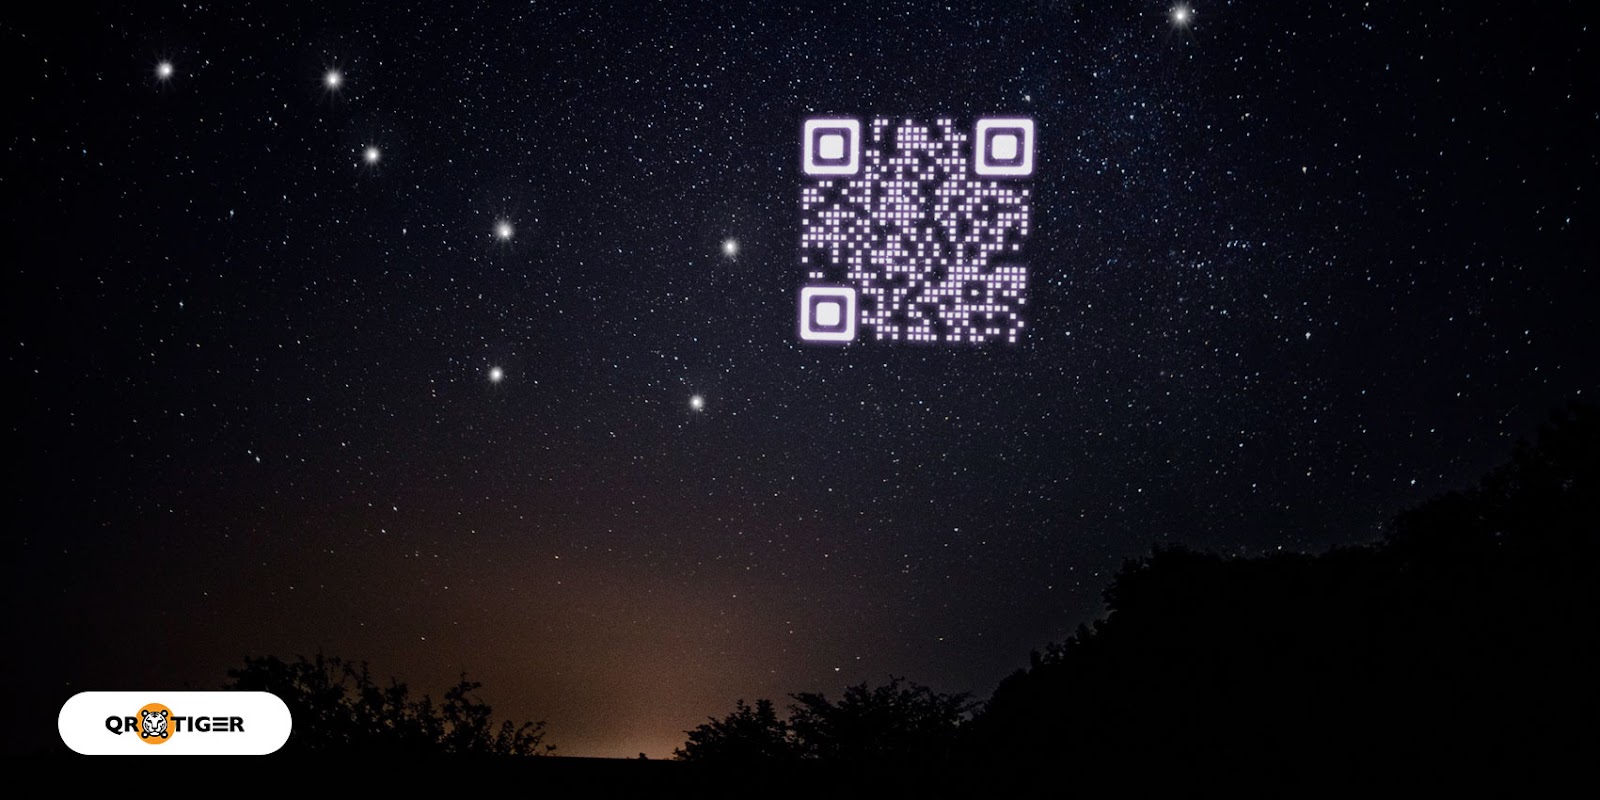 Aliens and QR codes